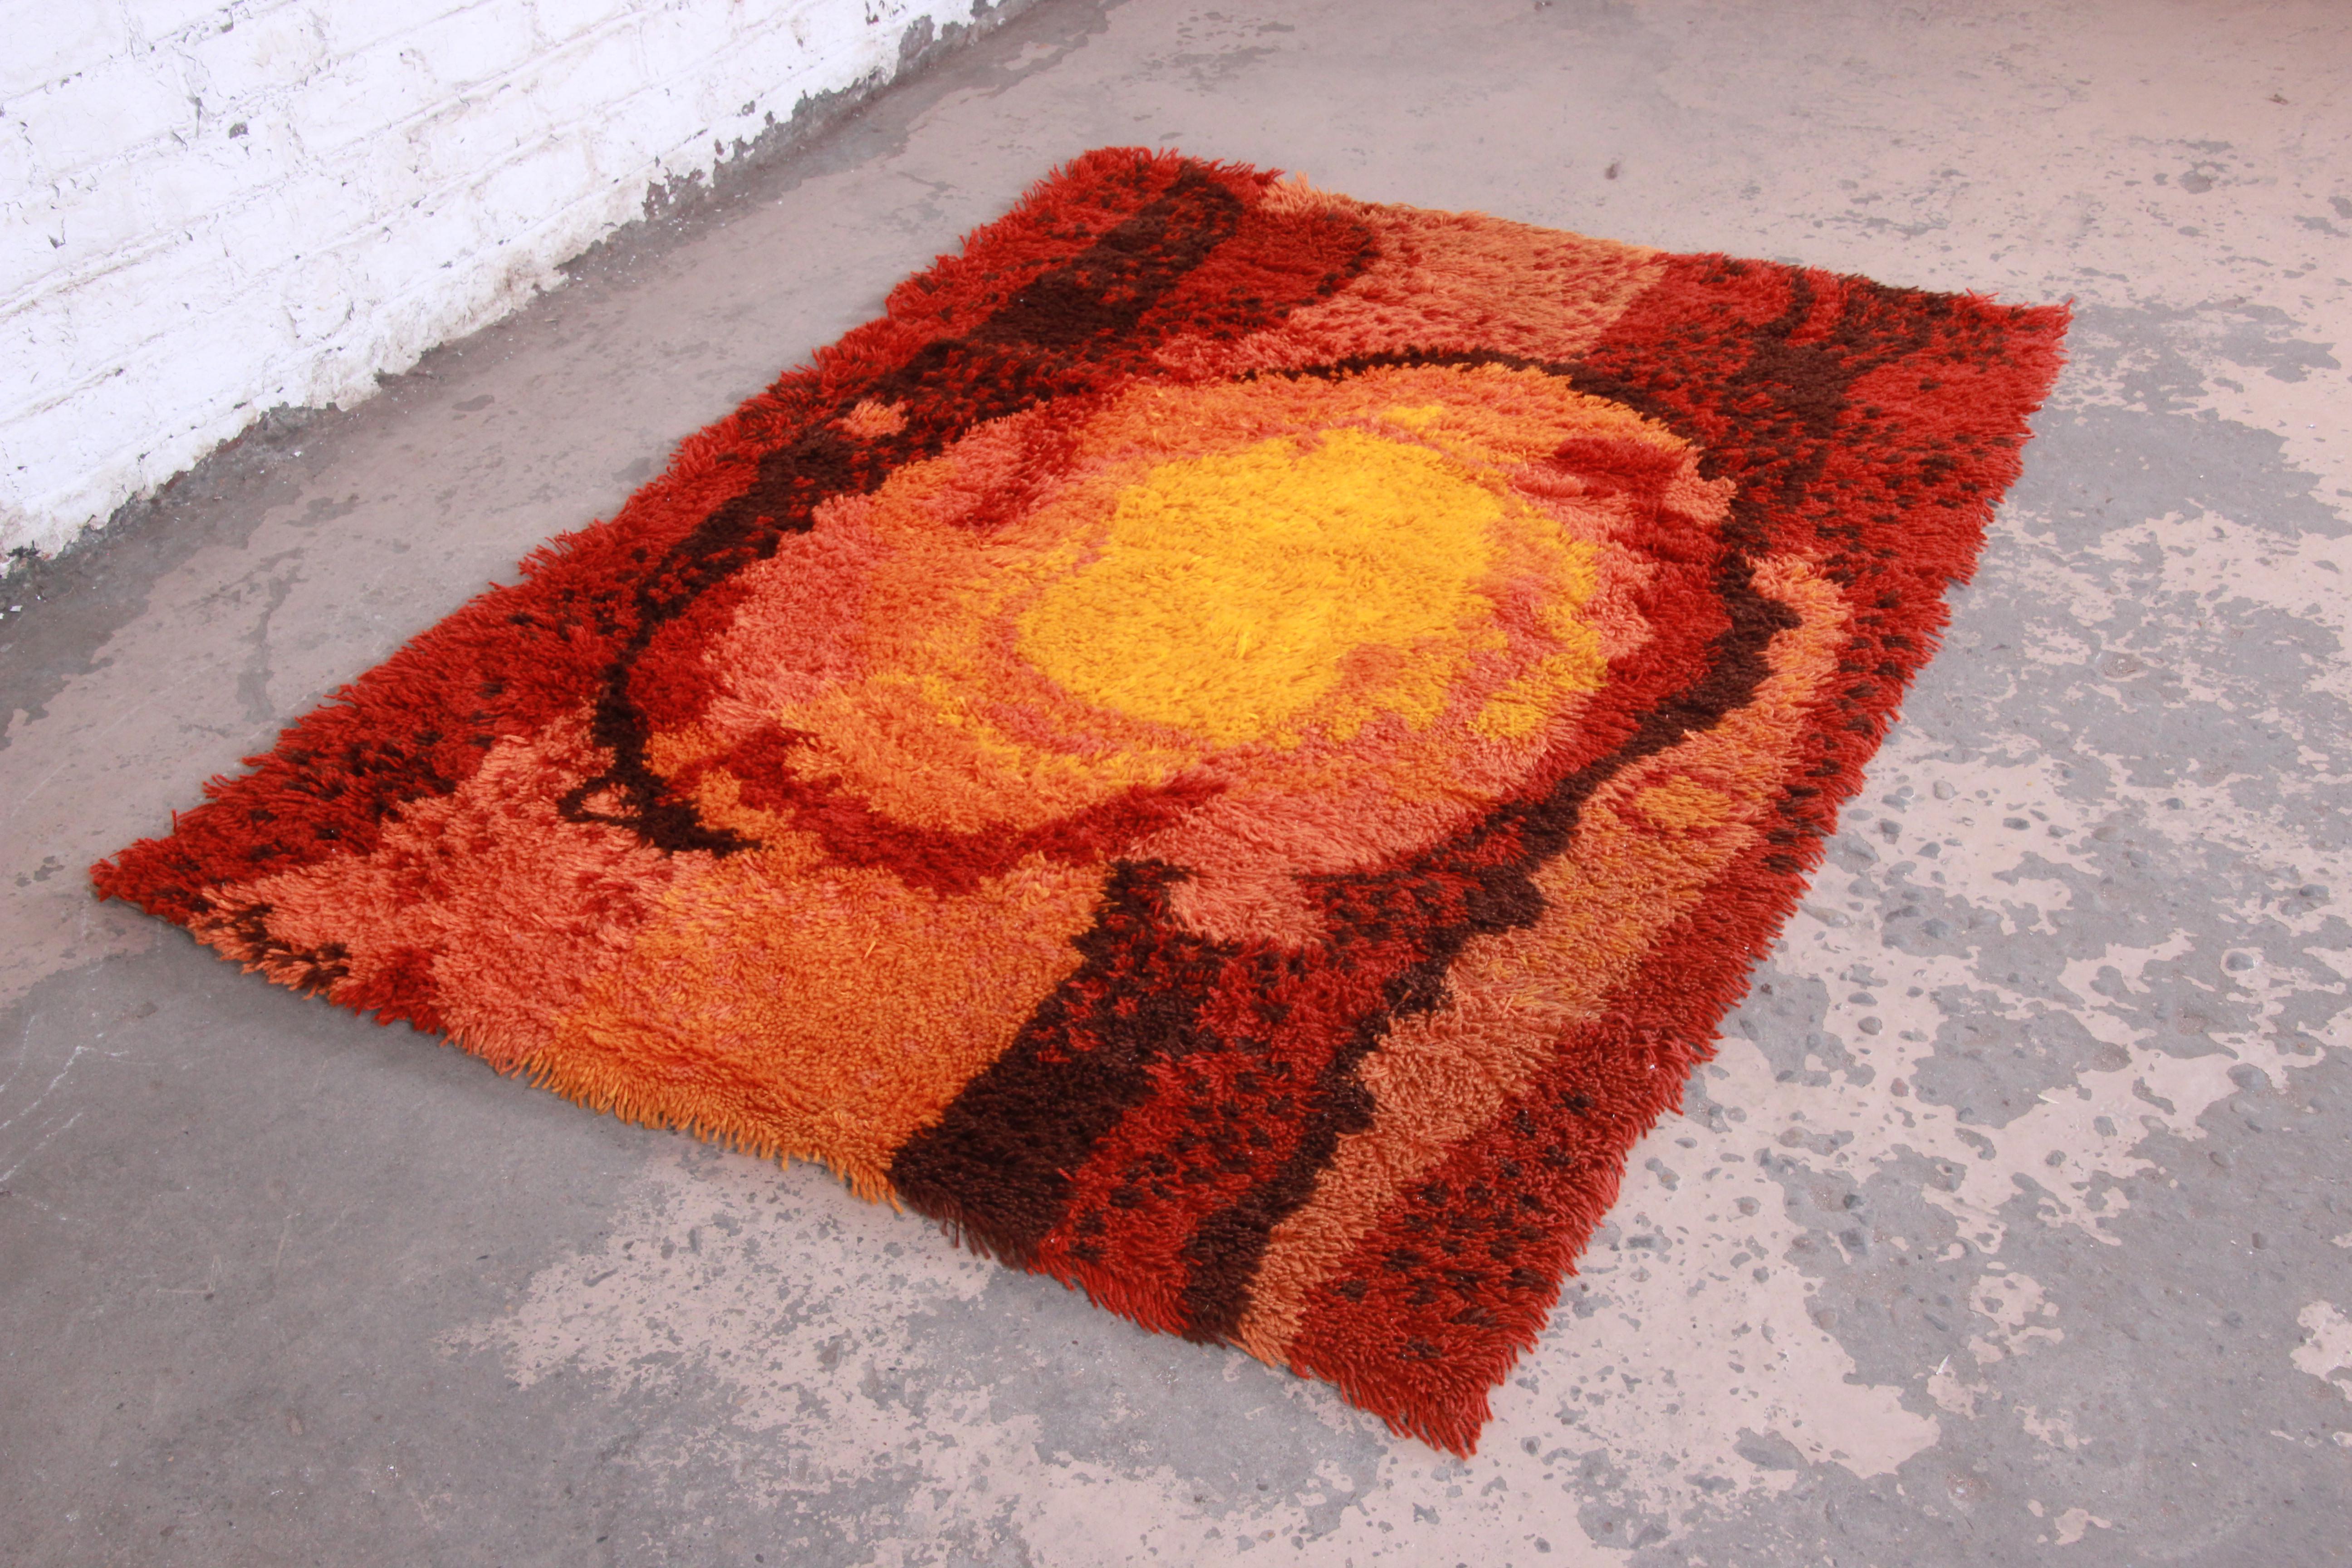 A very nice Danish modern sunburst Rya wool shag rug. The rugs has a nice thick wool pile with bright vibrant colors. The rug is in great vintage condition and retains a thick pile throughout.